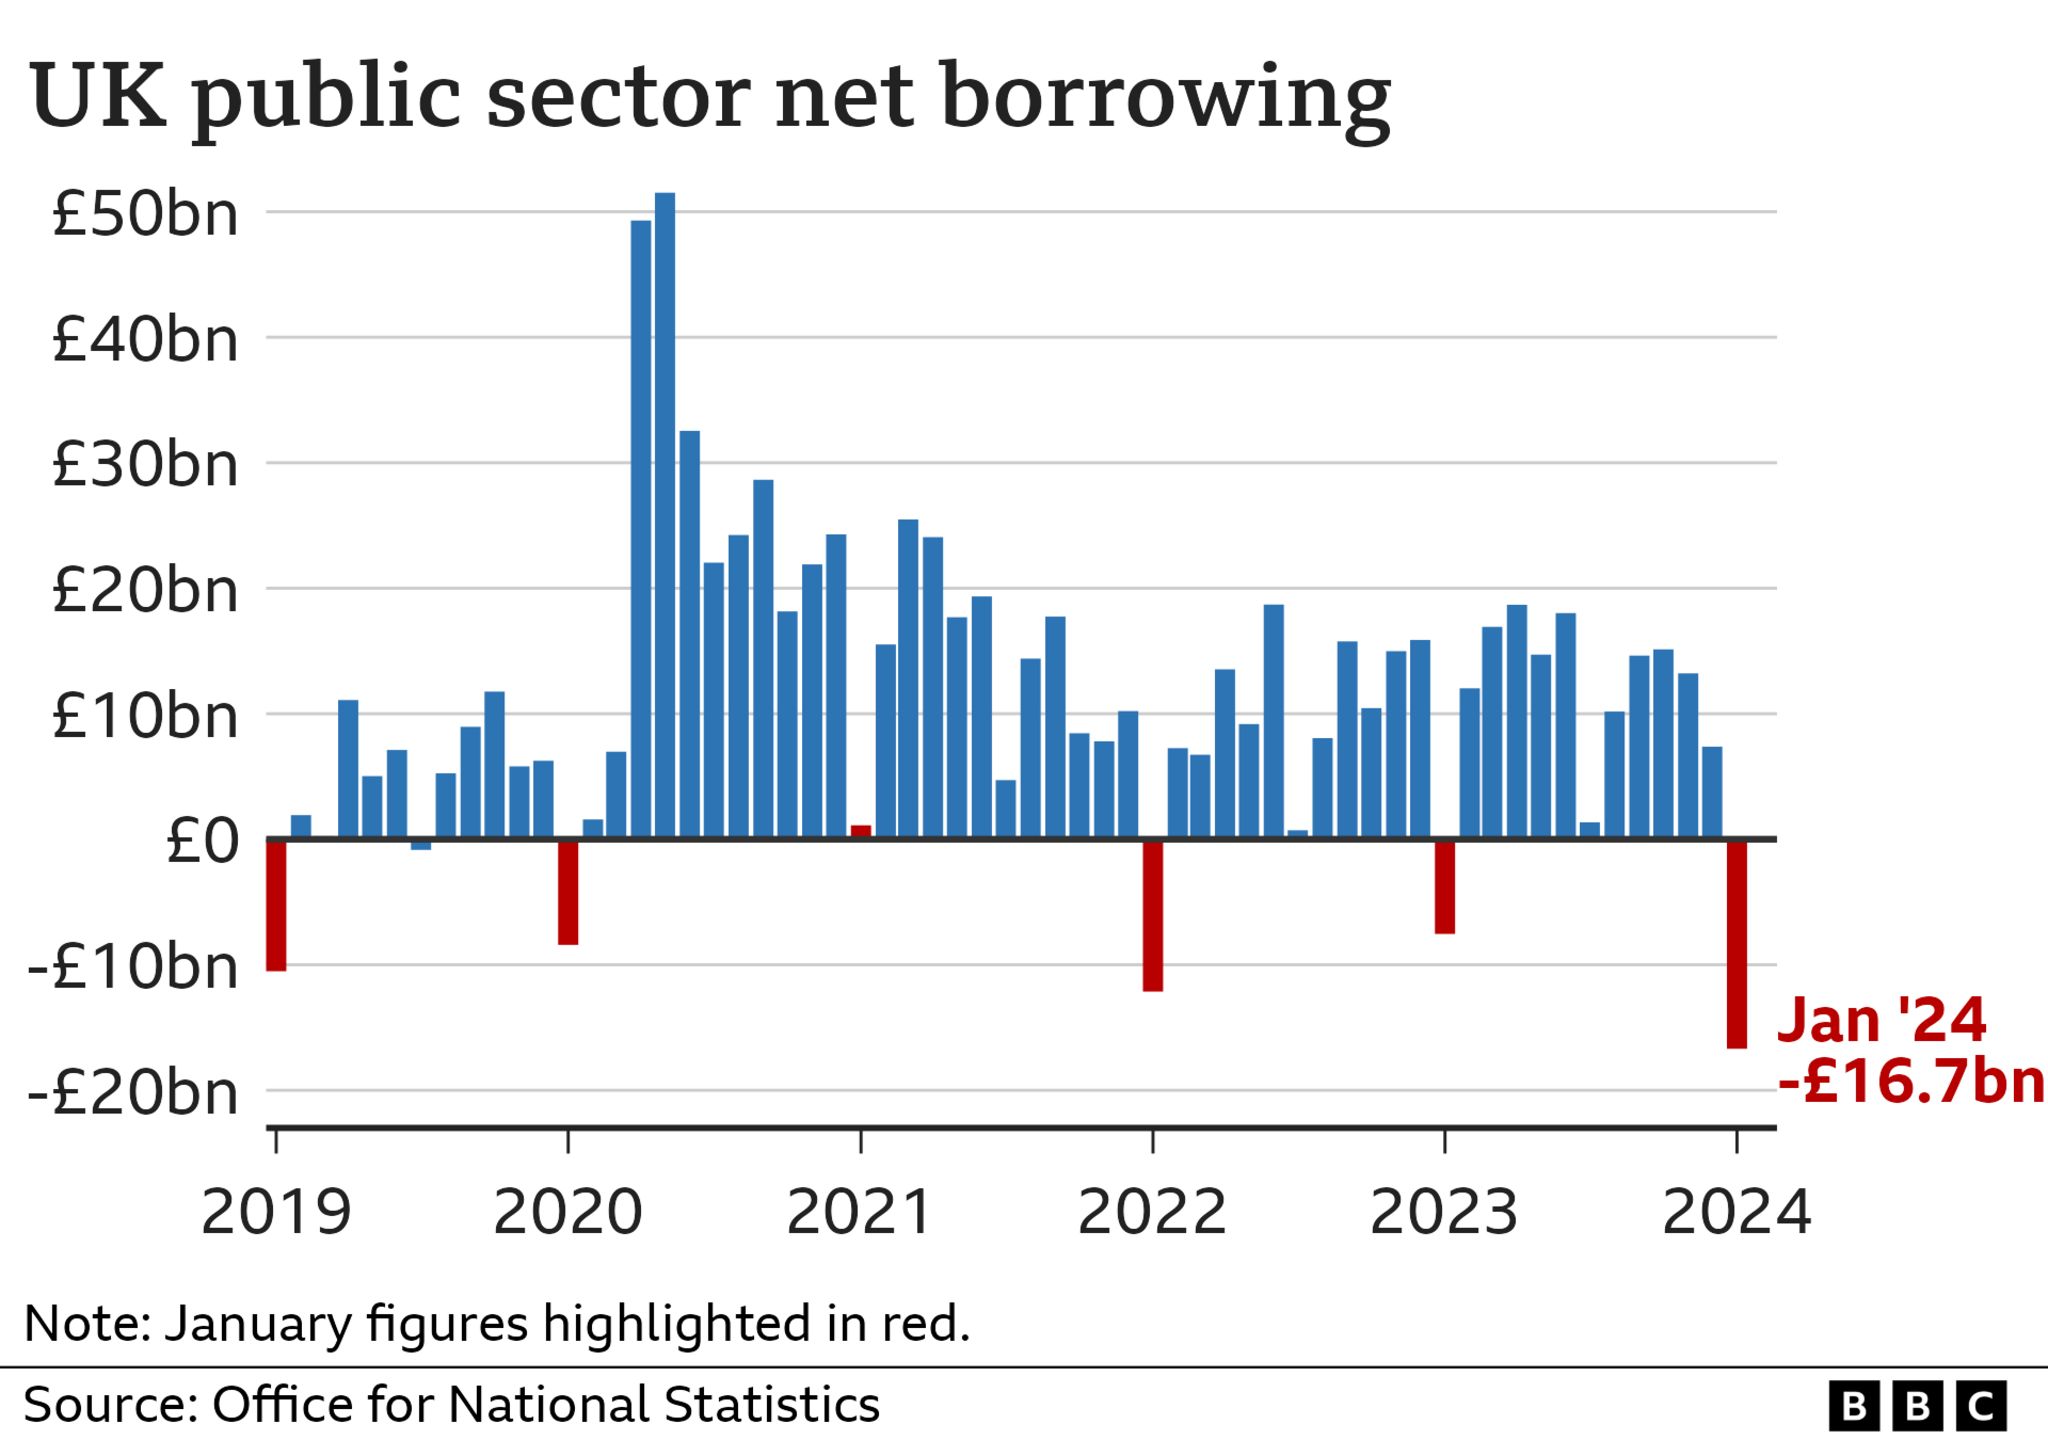 Chart showing public sector net borrowing on monthly basis